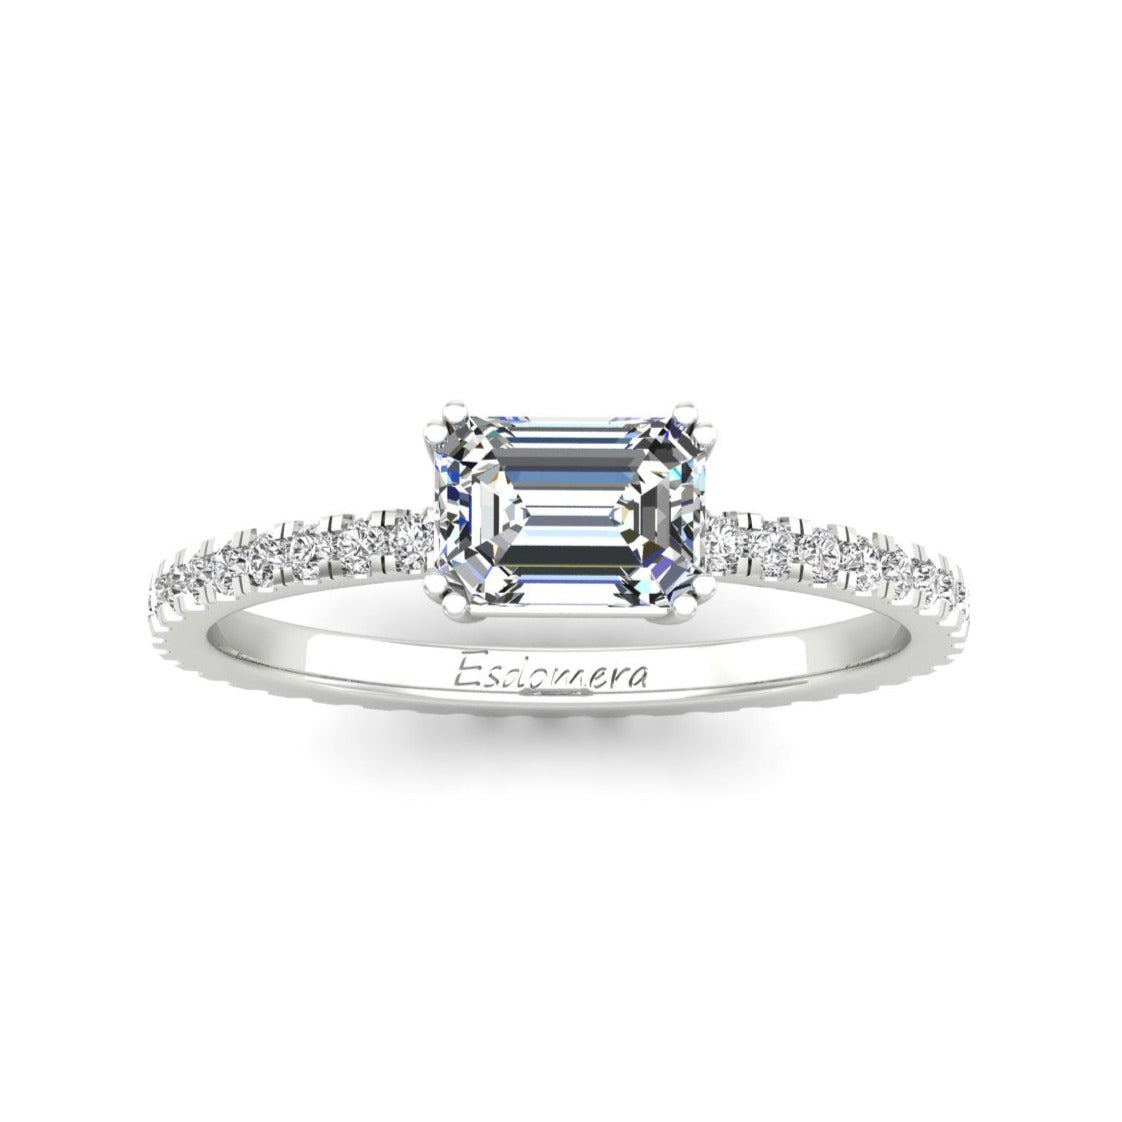 Emerald Cut 5x7mm Moissanite Pave Set Accents Engagement Ring